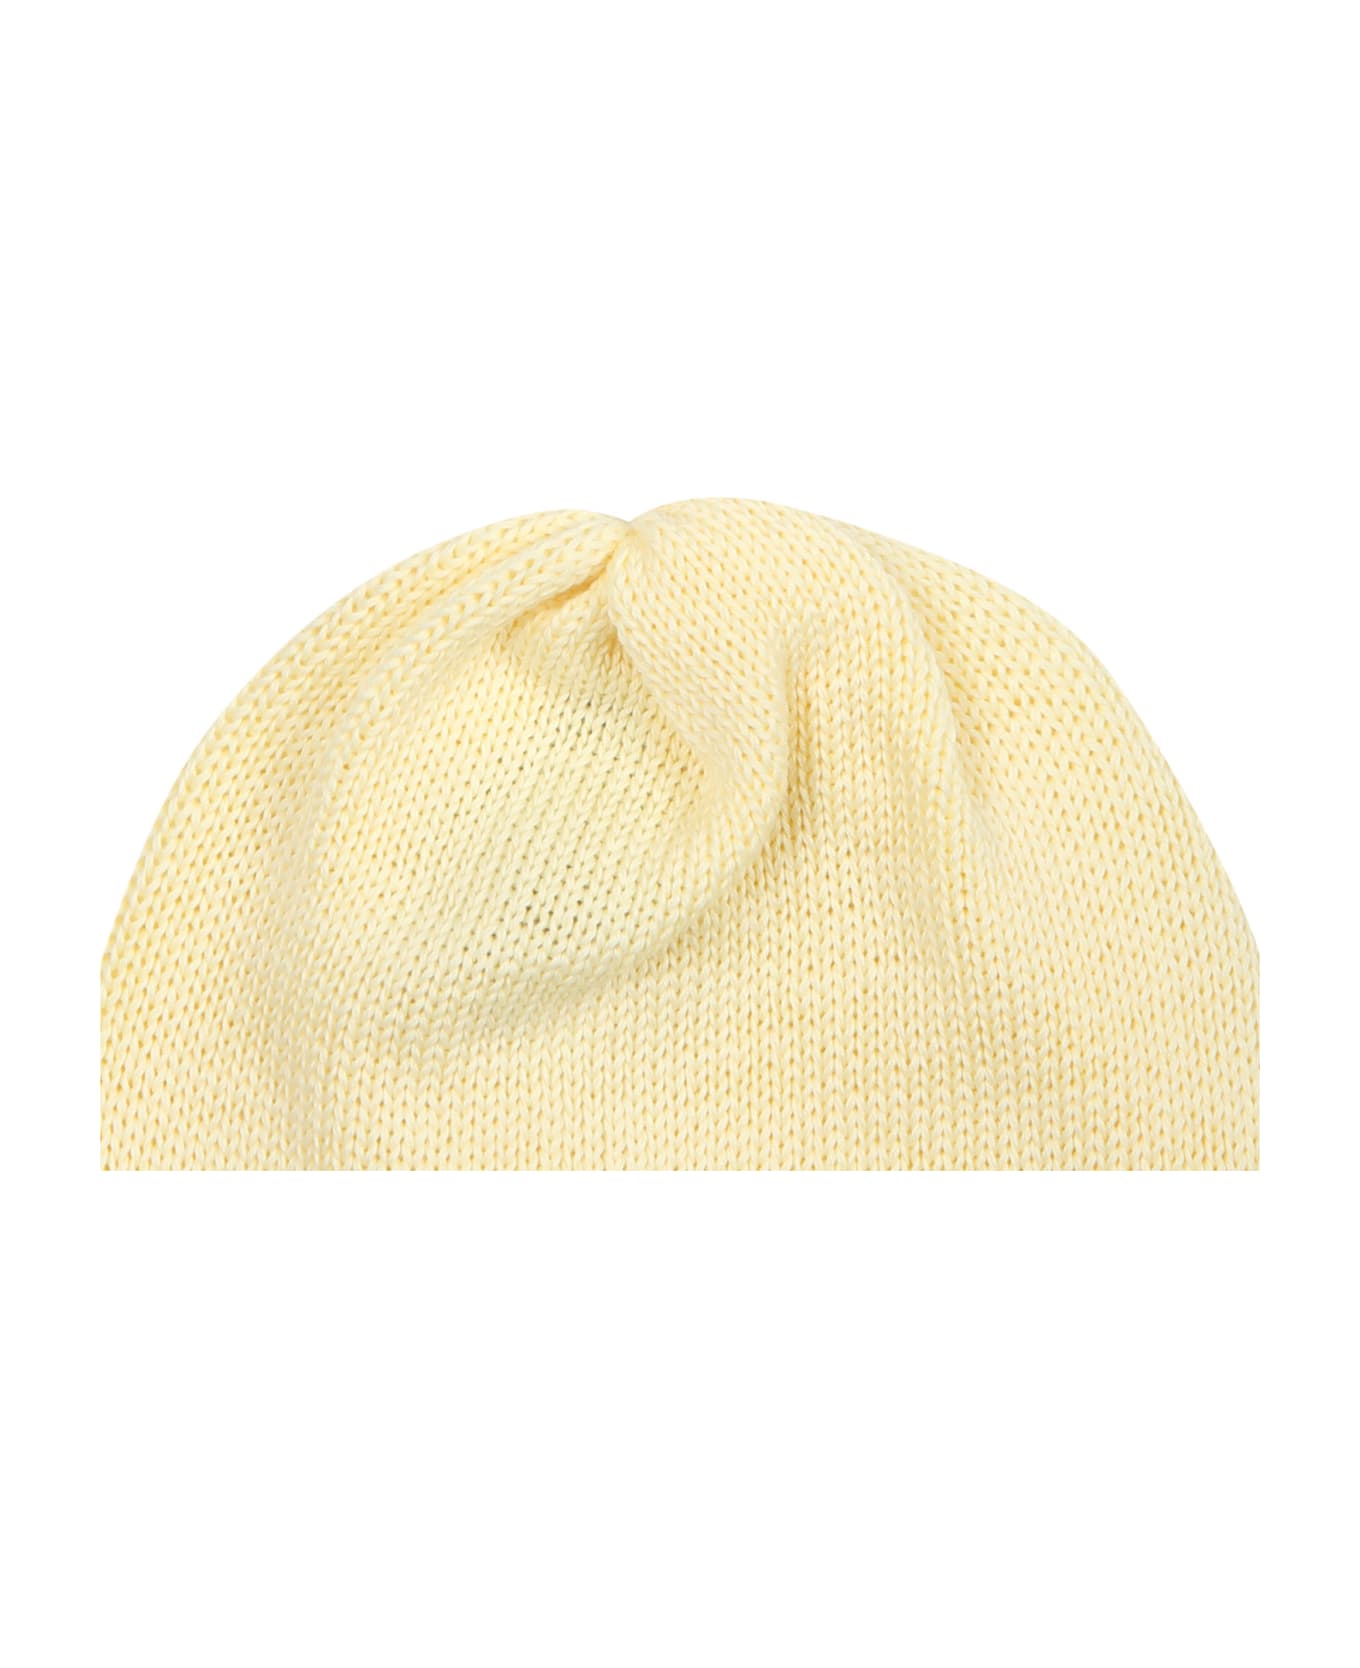 Little Bear Yellow Hat For Baby Kids - Yellow